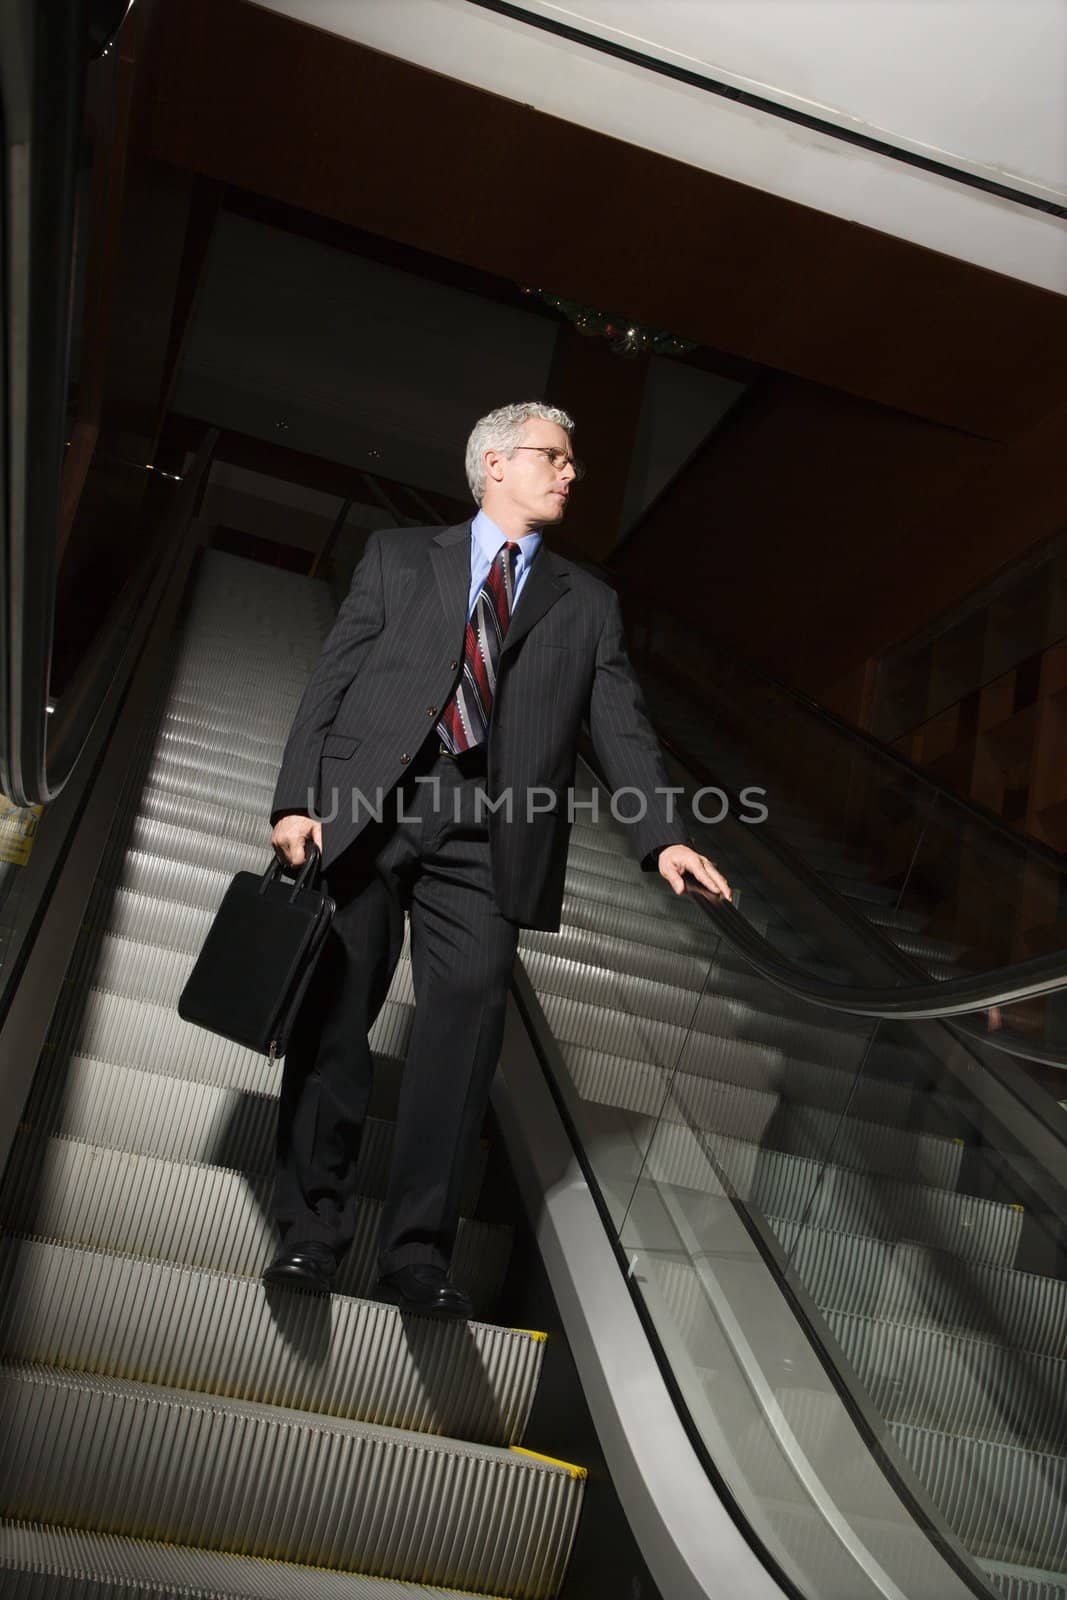 Prime adult Caucasian man in suit holding briefcase standing on down escalator holding rail.